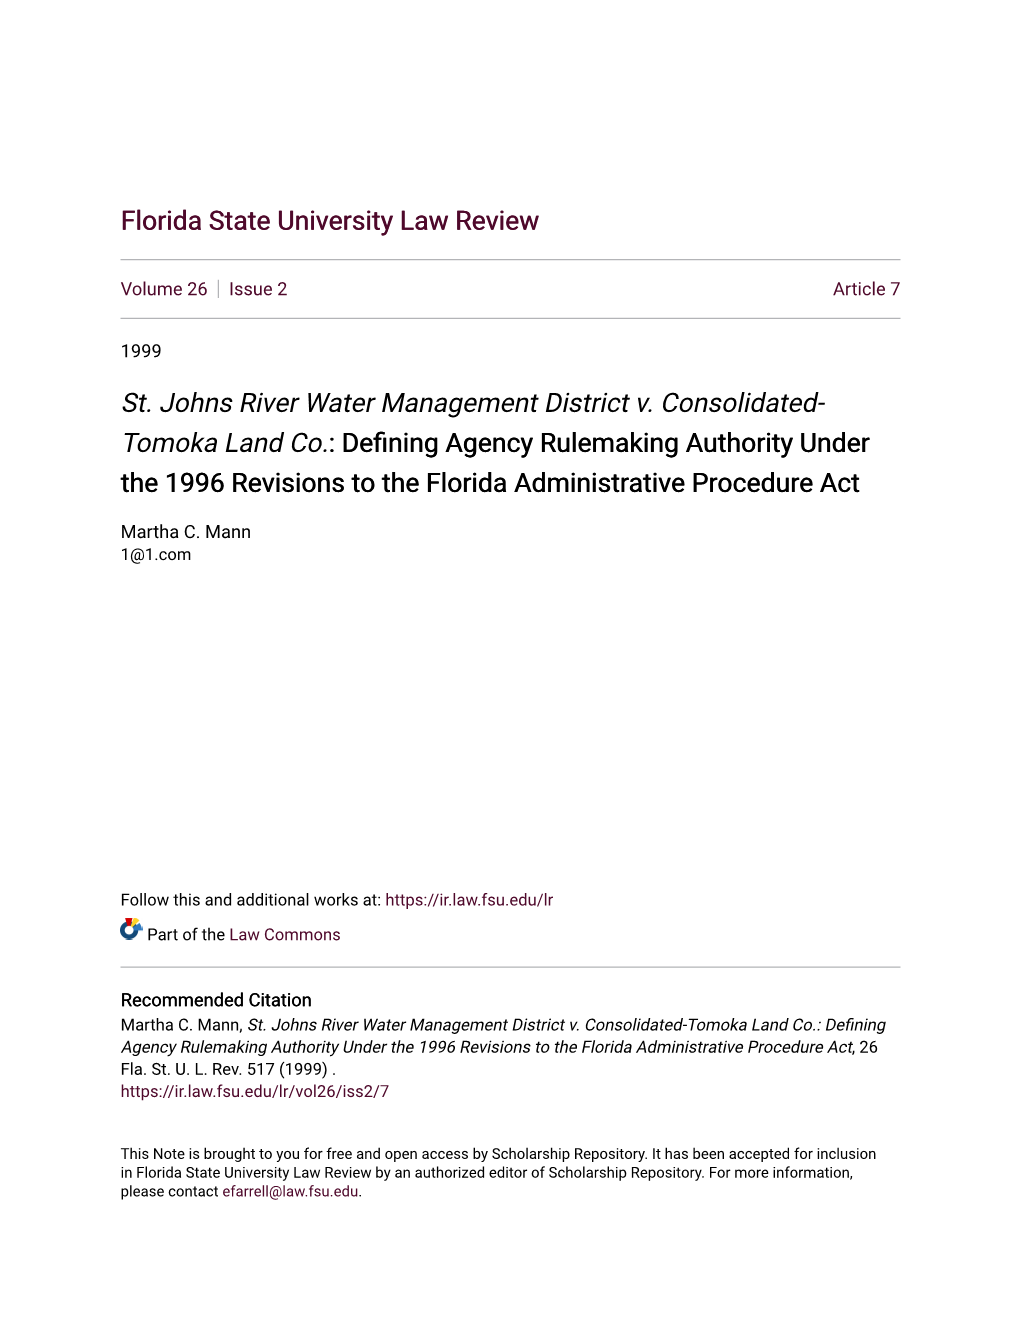 St. Johns River Water Management District V. Consolidated-Tomoka